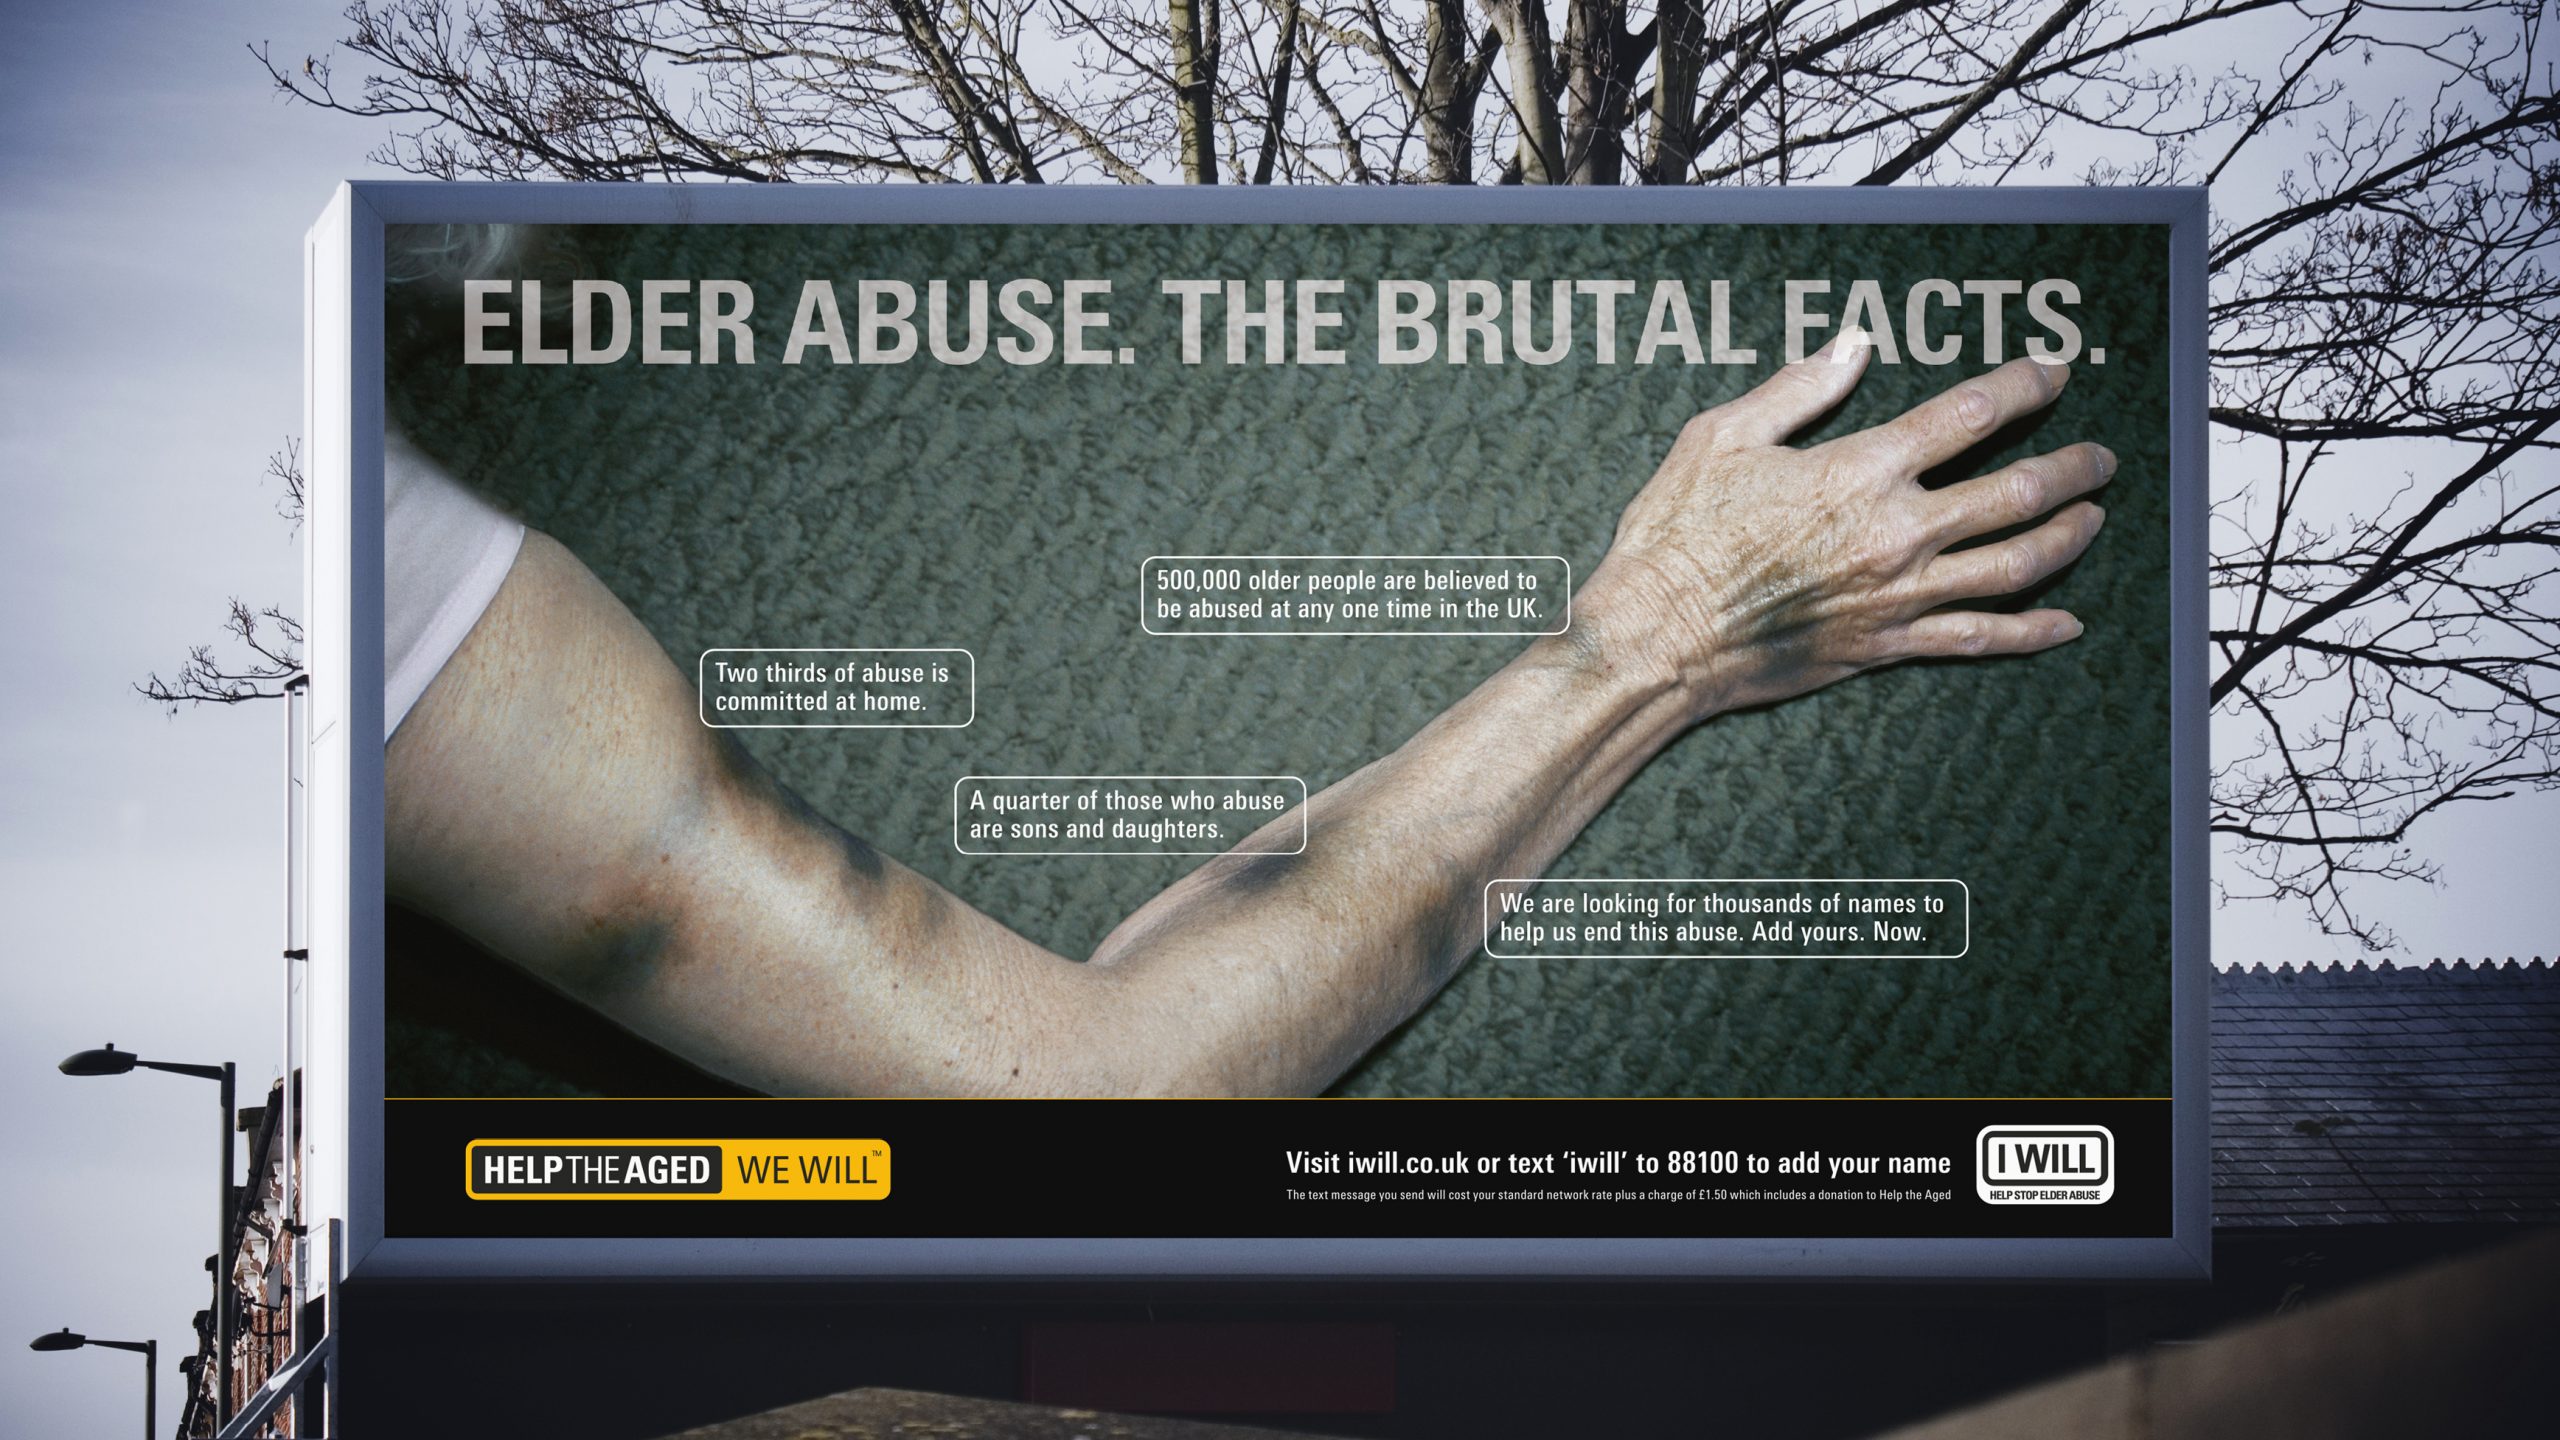 Entity-3-Three-Brand-Design-Agency-Sydney-Help-the-Aged-4-elder-abuse-campaign-ooh-advertising